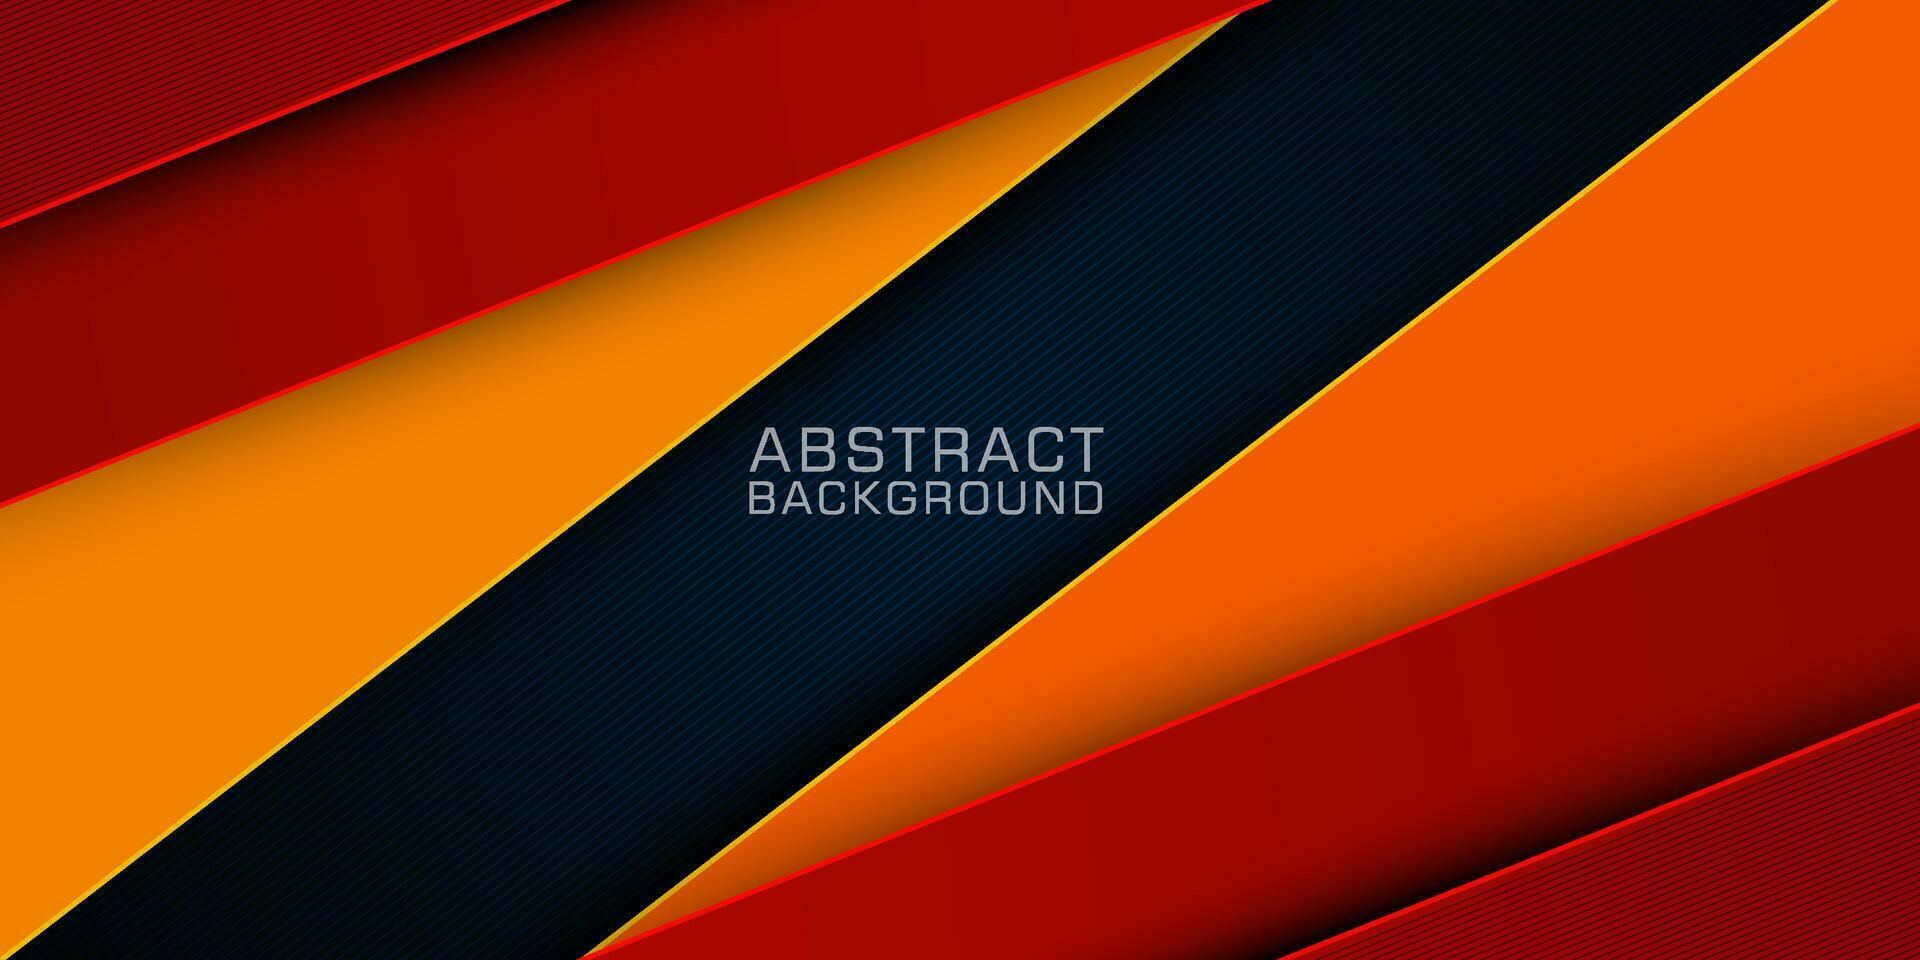 Abstract colorful  orange and red triangle overlap background. 3d look with shadow pattern shapes composition with space for text. Eps10 vector